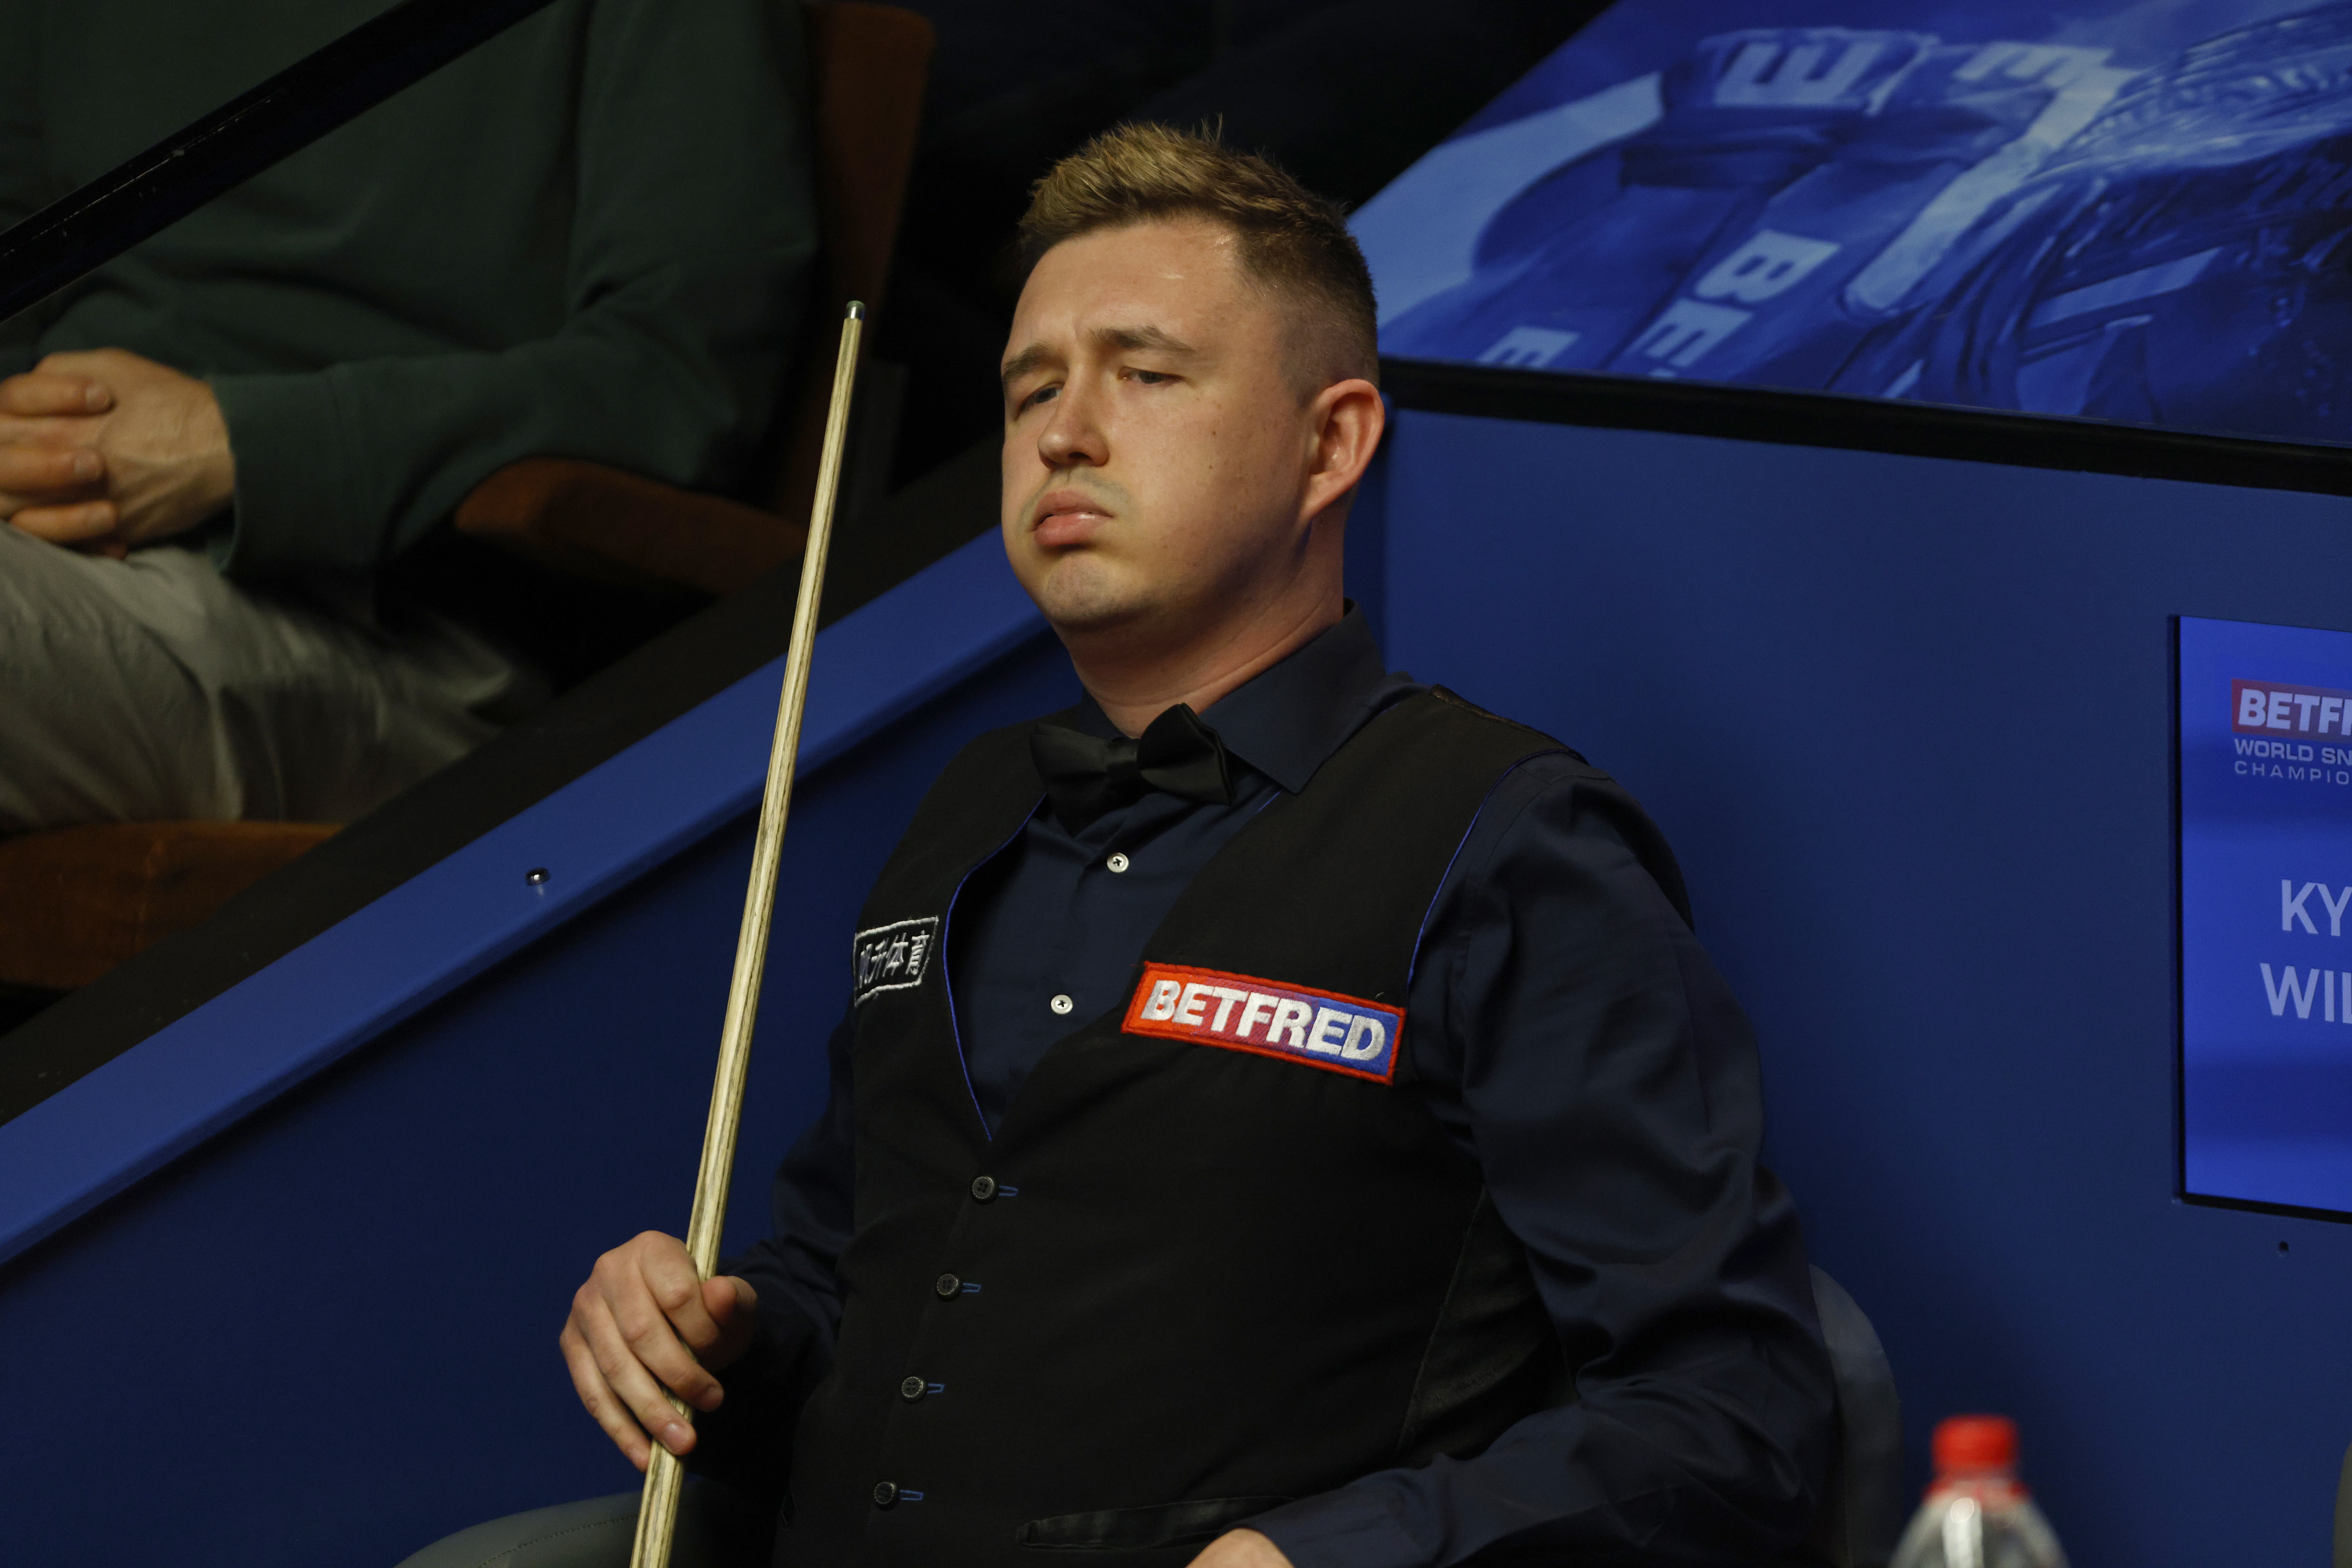 Youngster Riley Powell shocks Kyren Wilson in Snooker Shoot Out The Independent pic